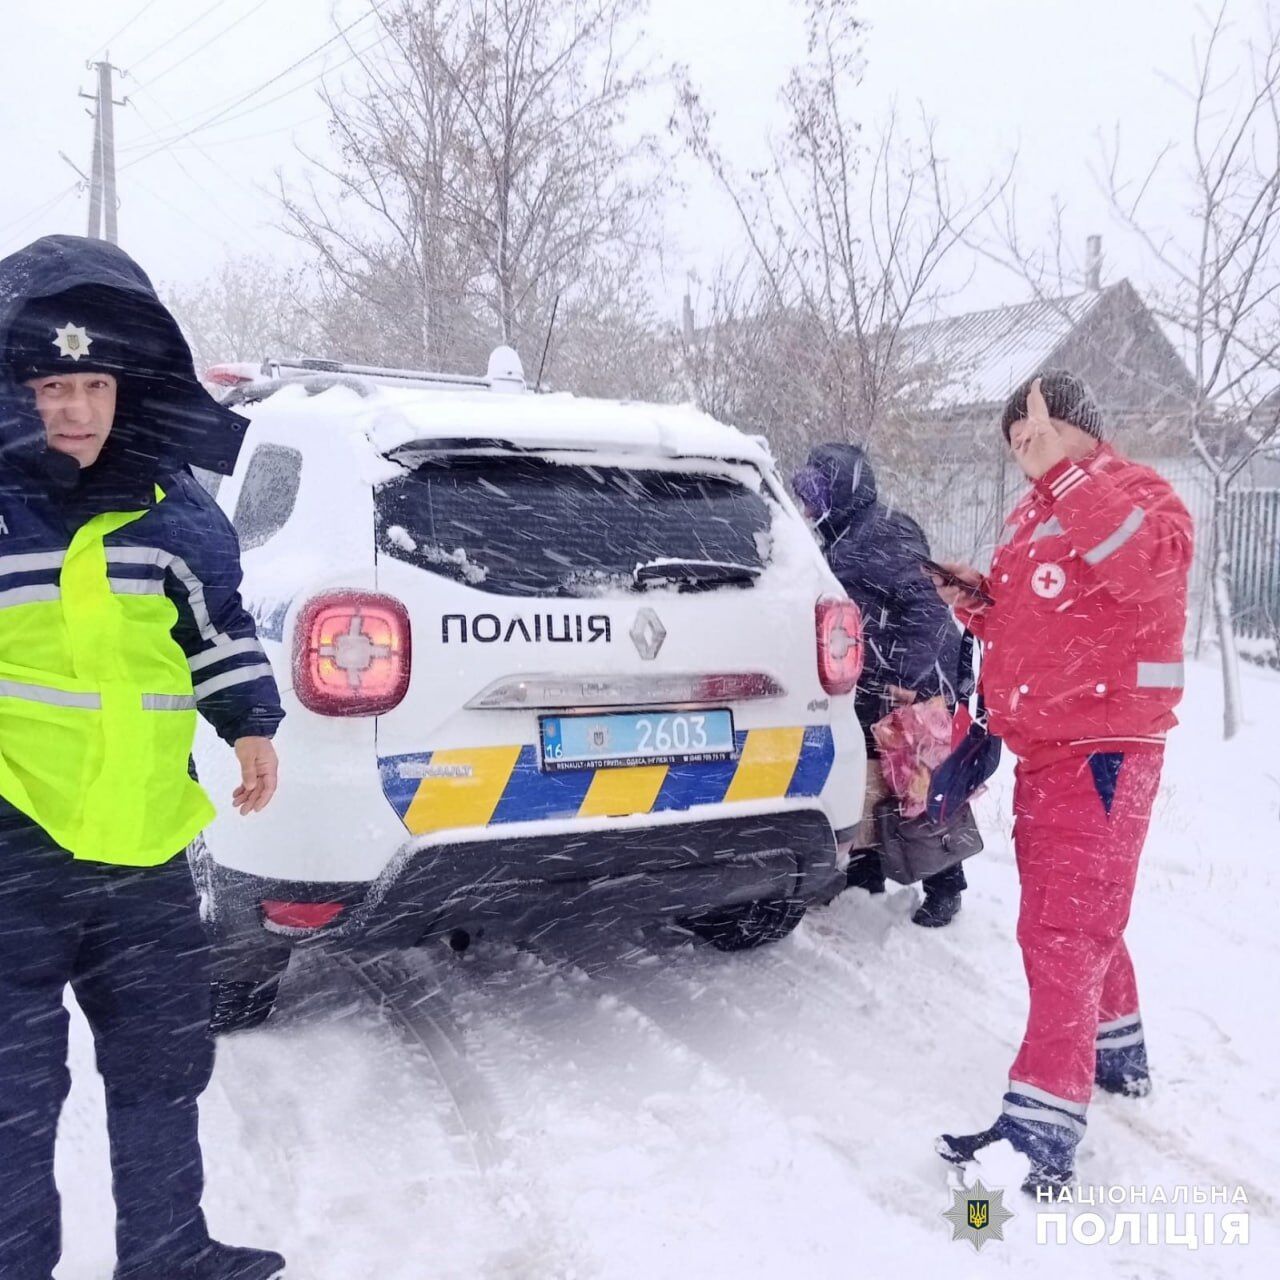 Snow apocalypse in Odesa region: Odesa-Reni highway blocked, roads and streets in chaos